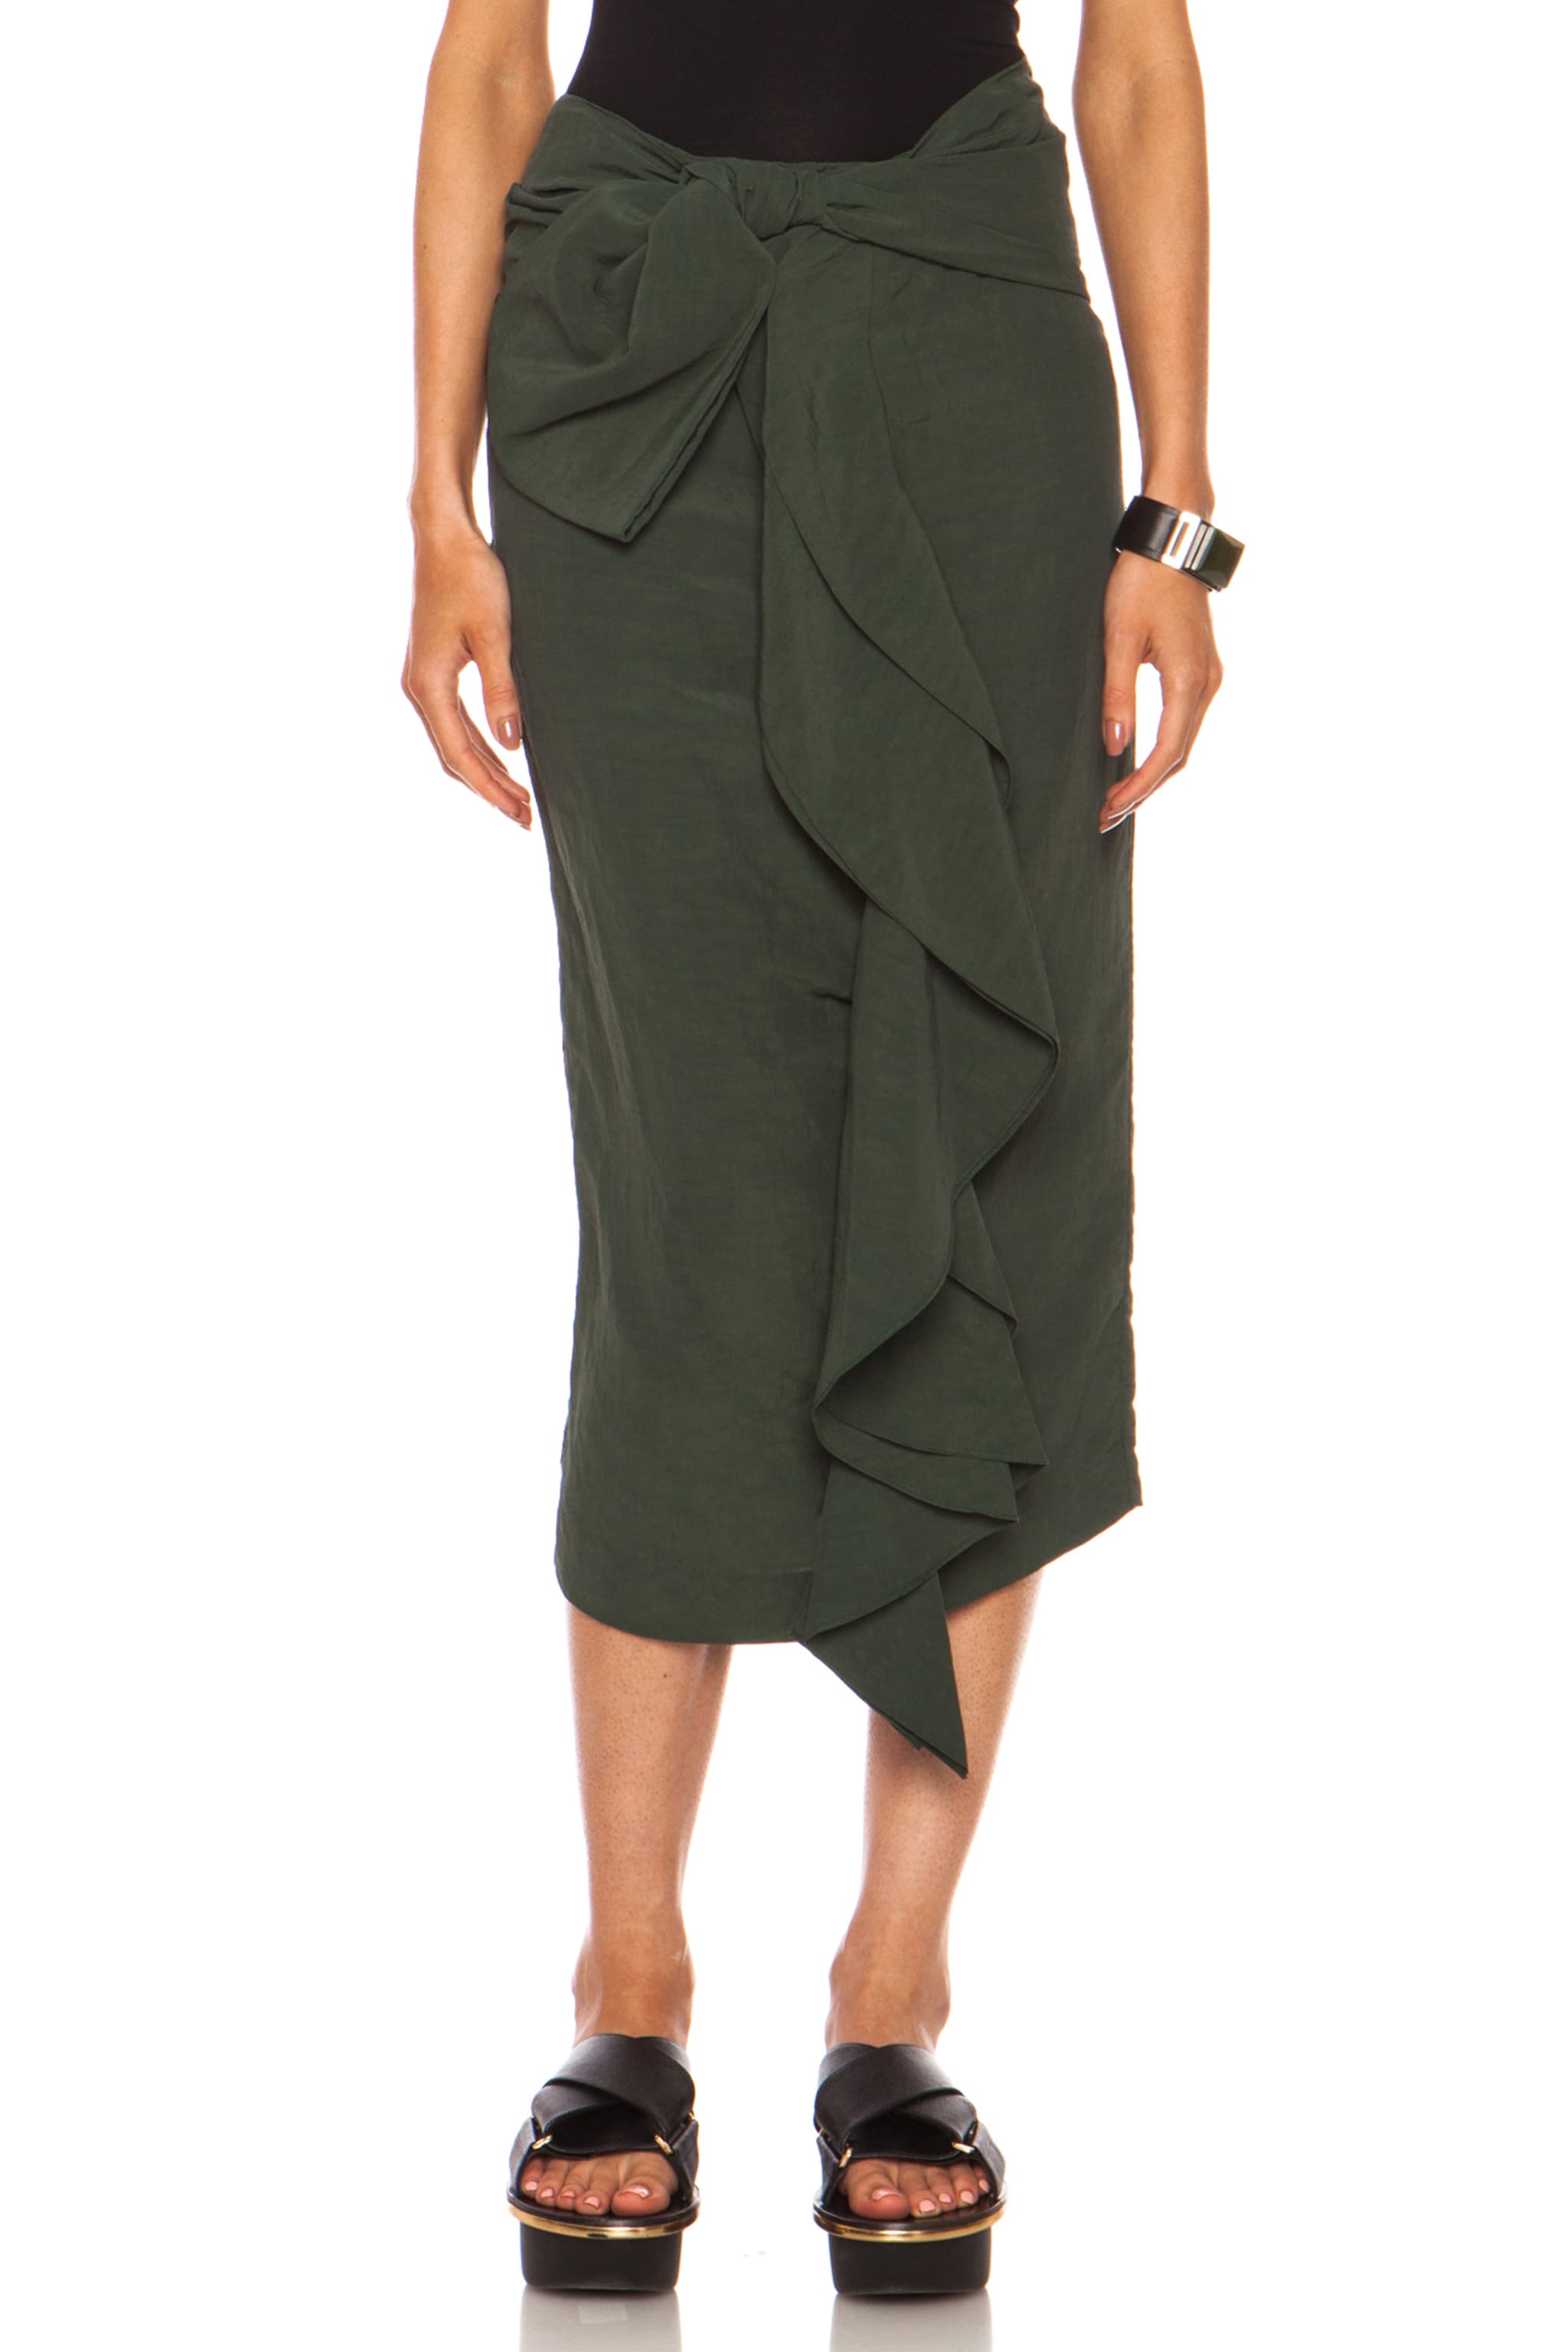 Image 1 of Marni Viscose-Blend Tie Front Skirt in Cypress